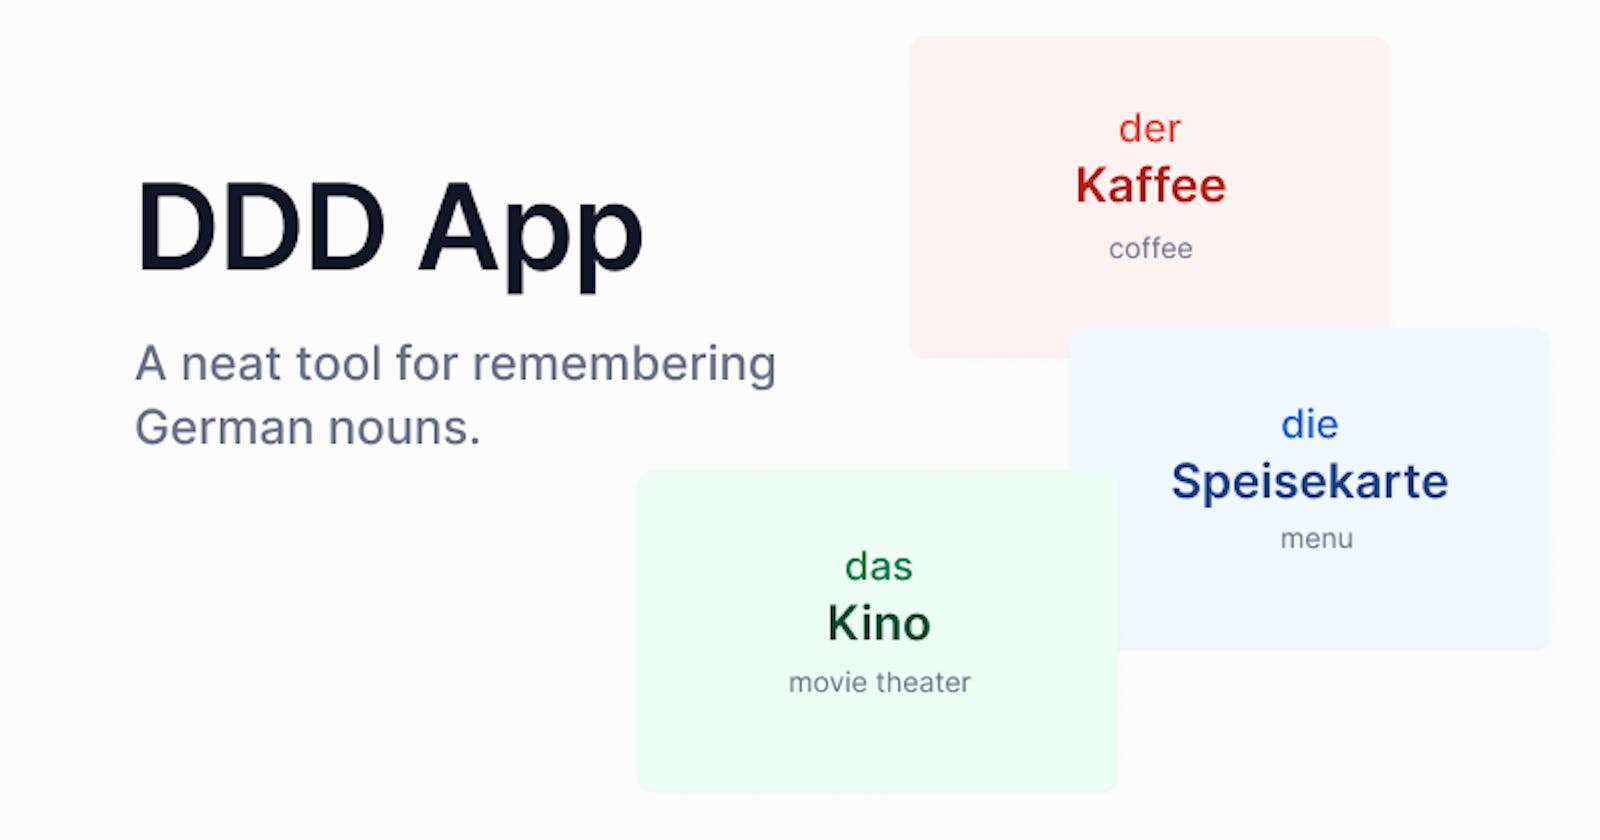 DDD App: a Neat Tool for Remembering German Nouns